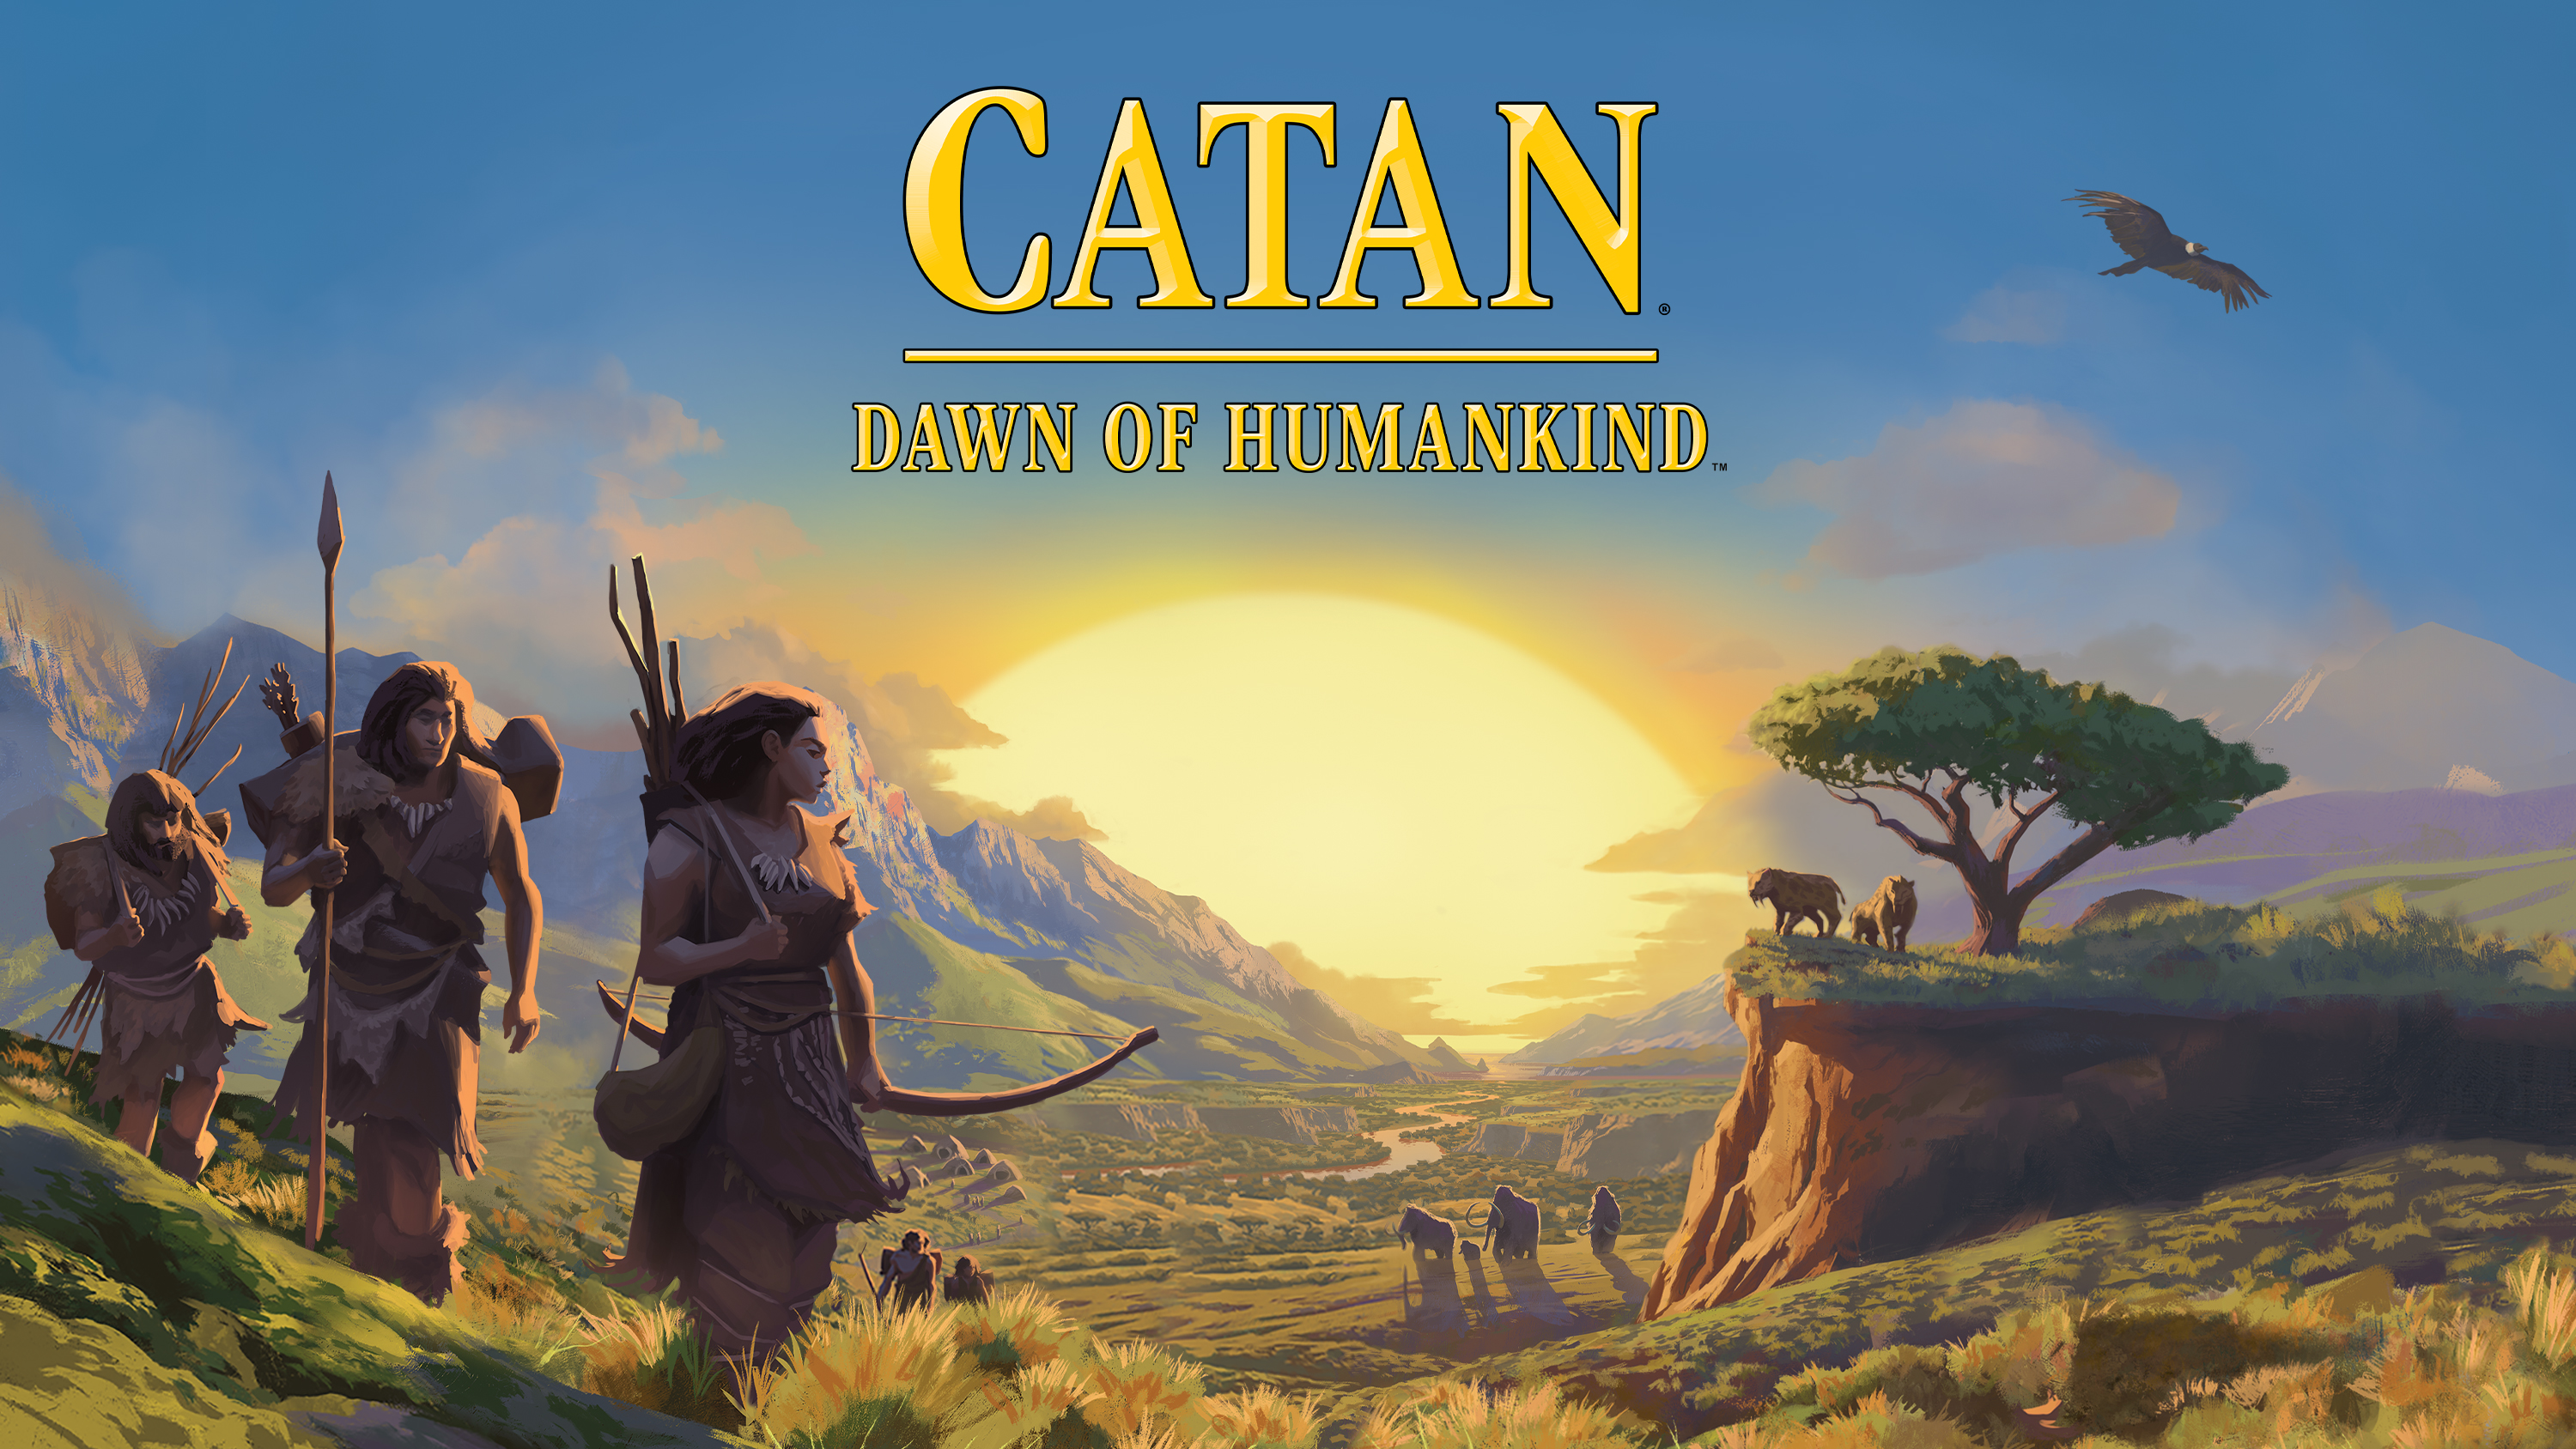 The box art for Catan: Dawn of Humankind, depicting indigenous people trekking out of a valley with mammoths and sabertooth tigers in the distance.